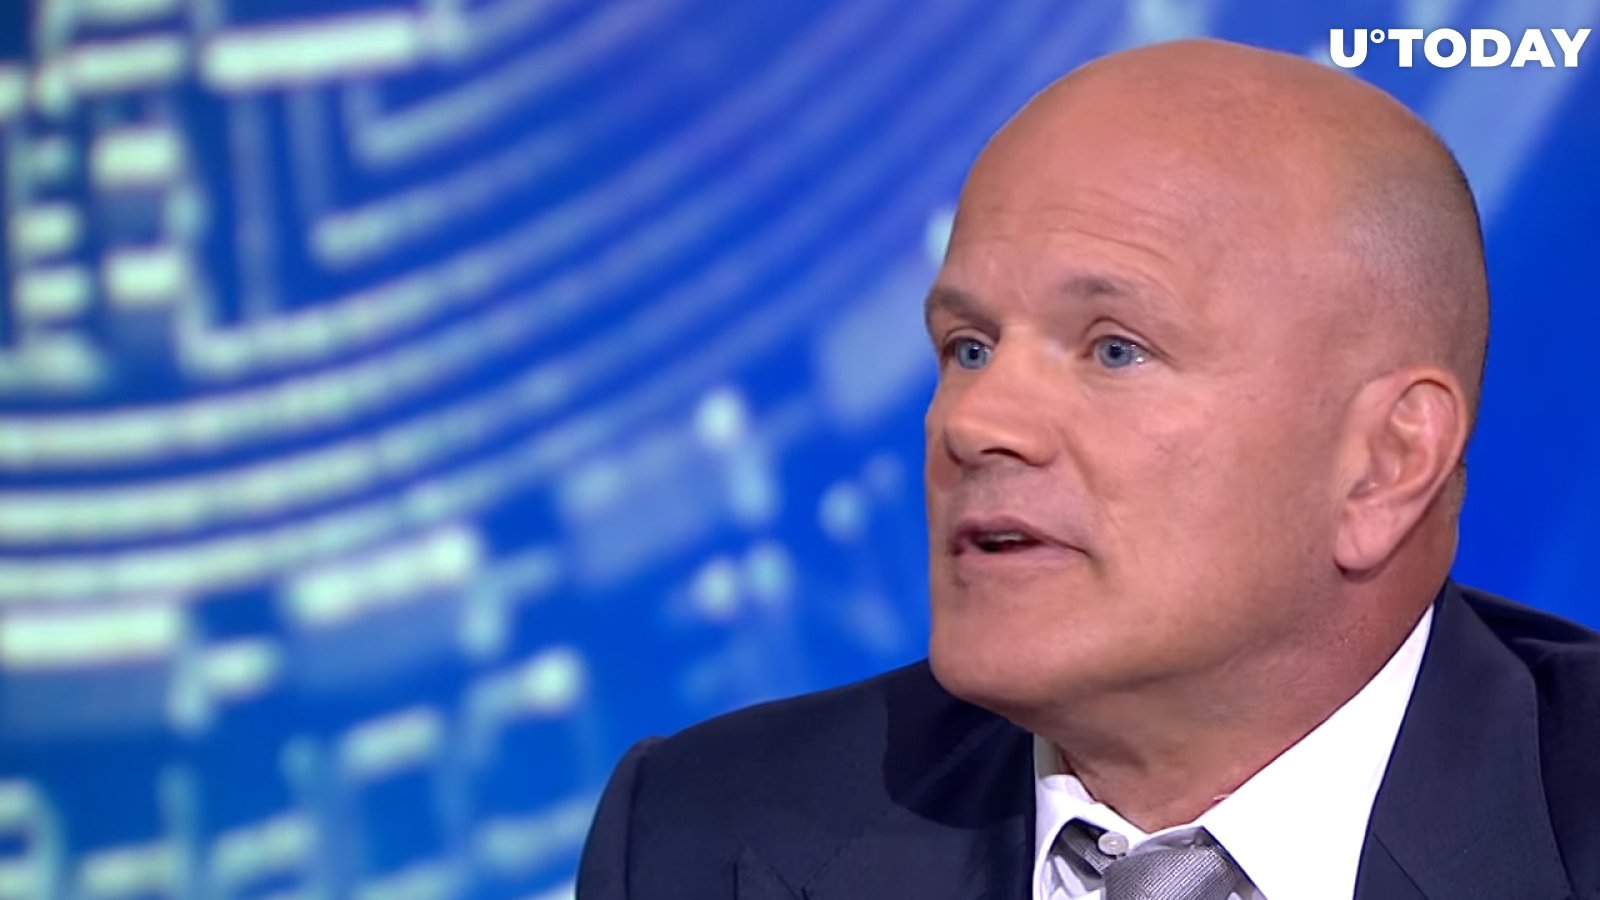 Bitcoin Volatility Likely to Keep Coming Down, Mike Novogratz Explains Why